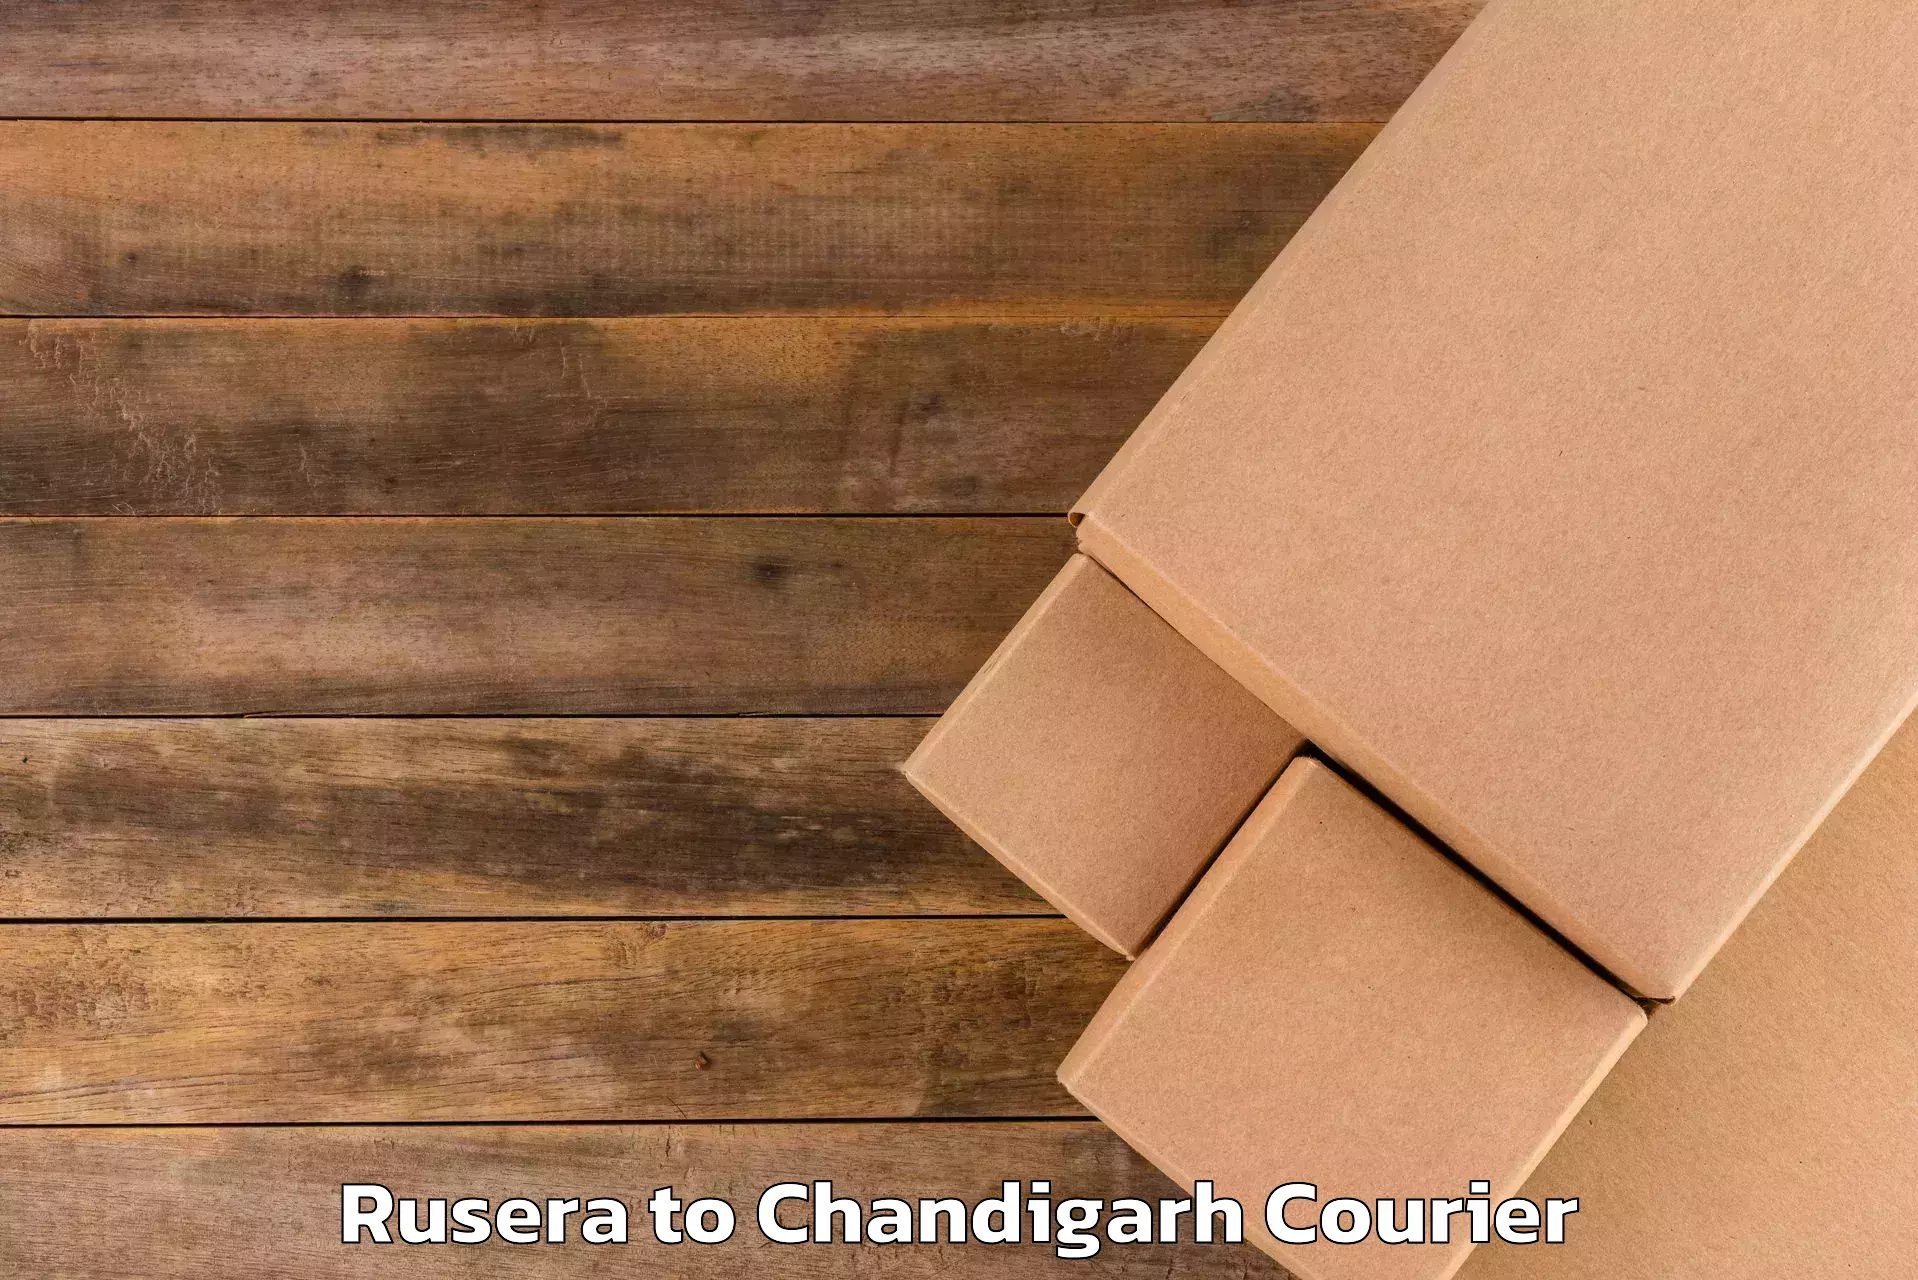 Luggage delivery news Rusera to Chandigarh